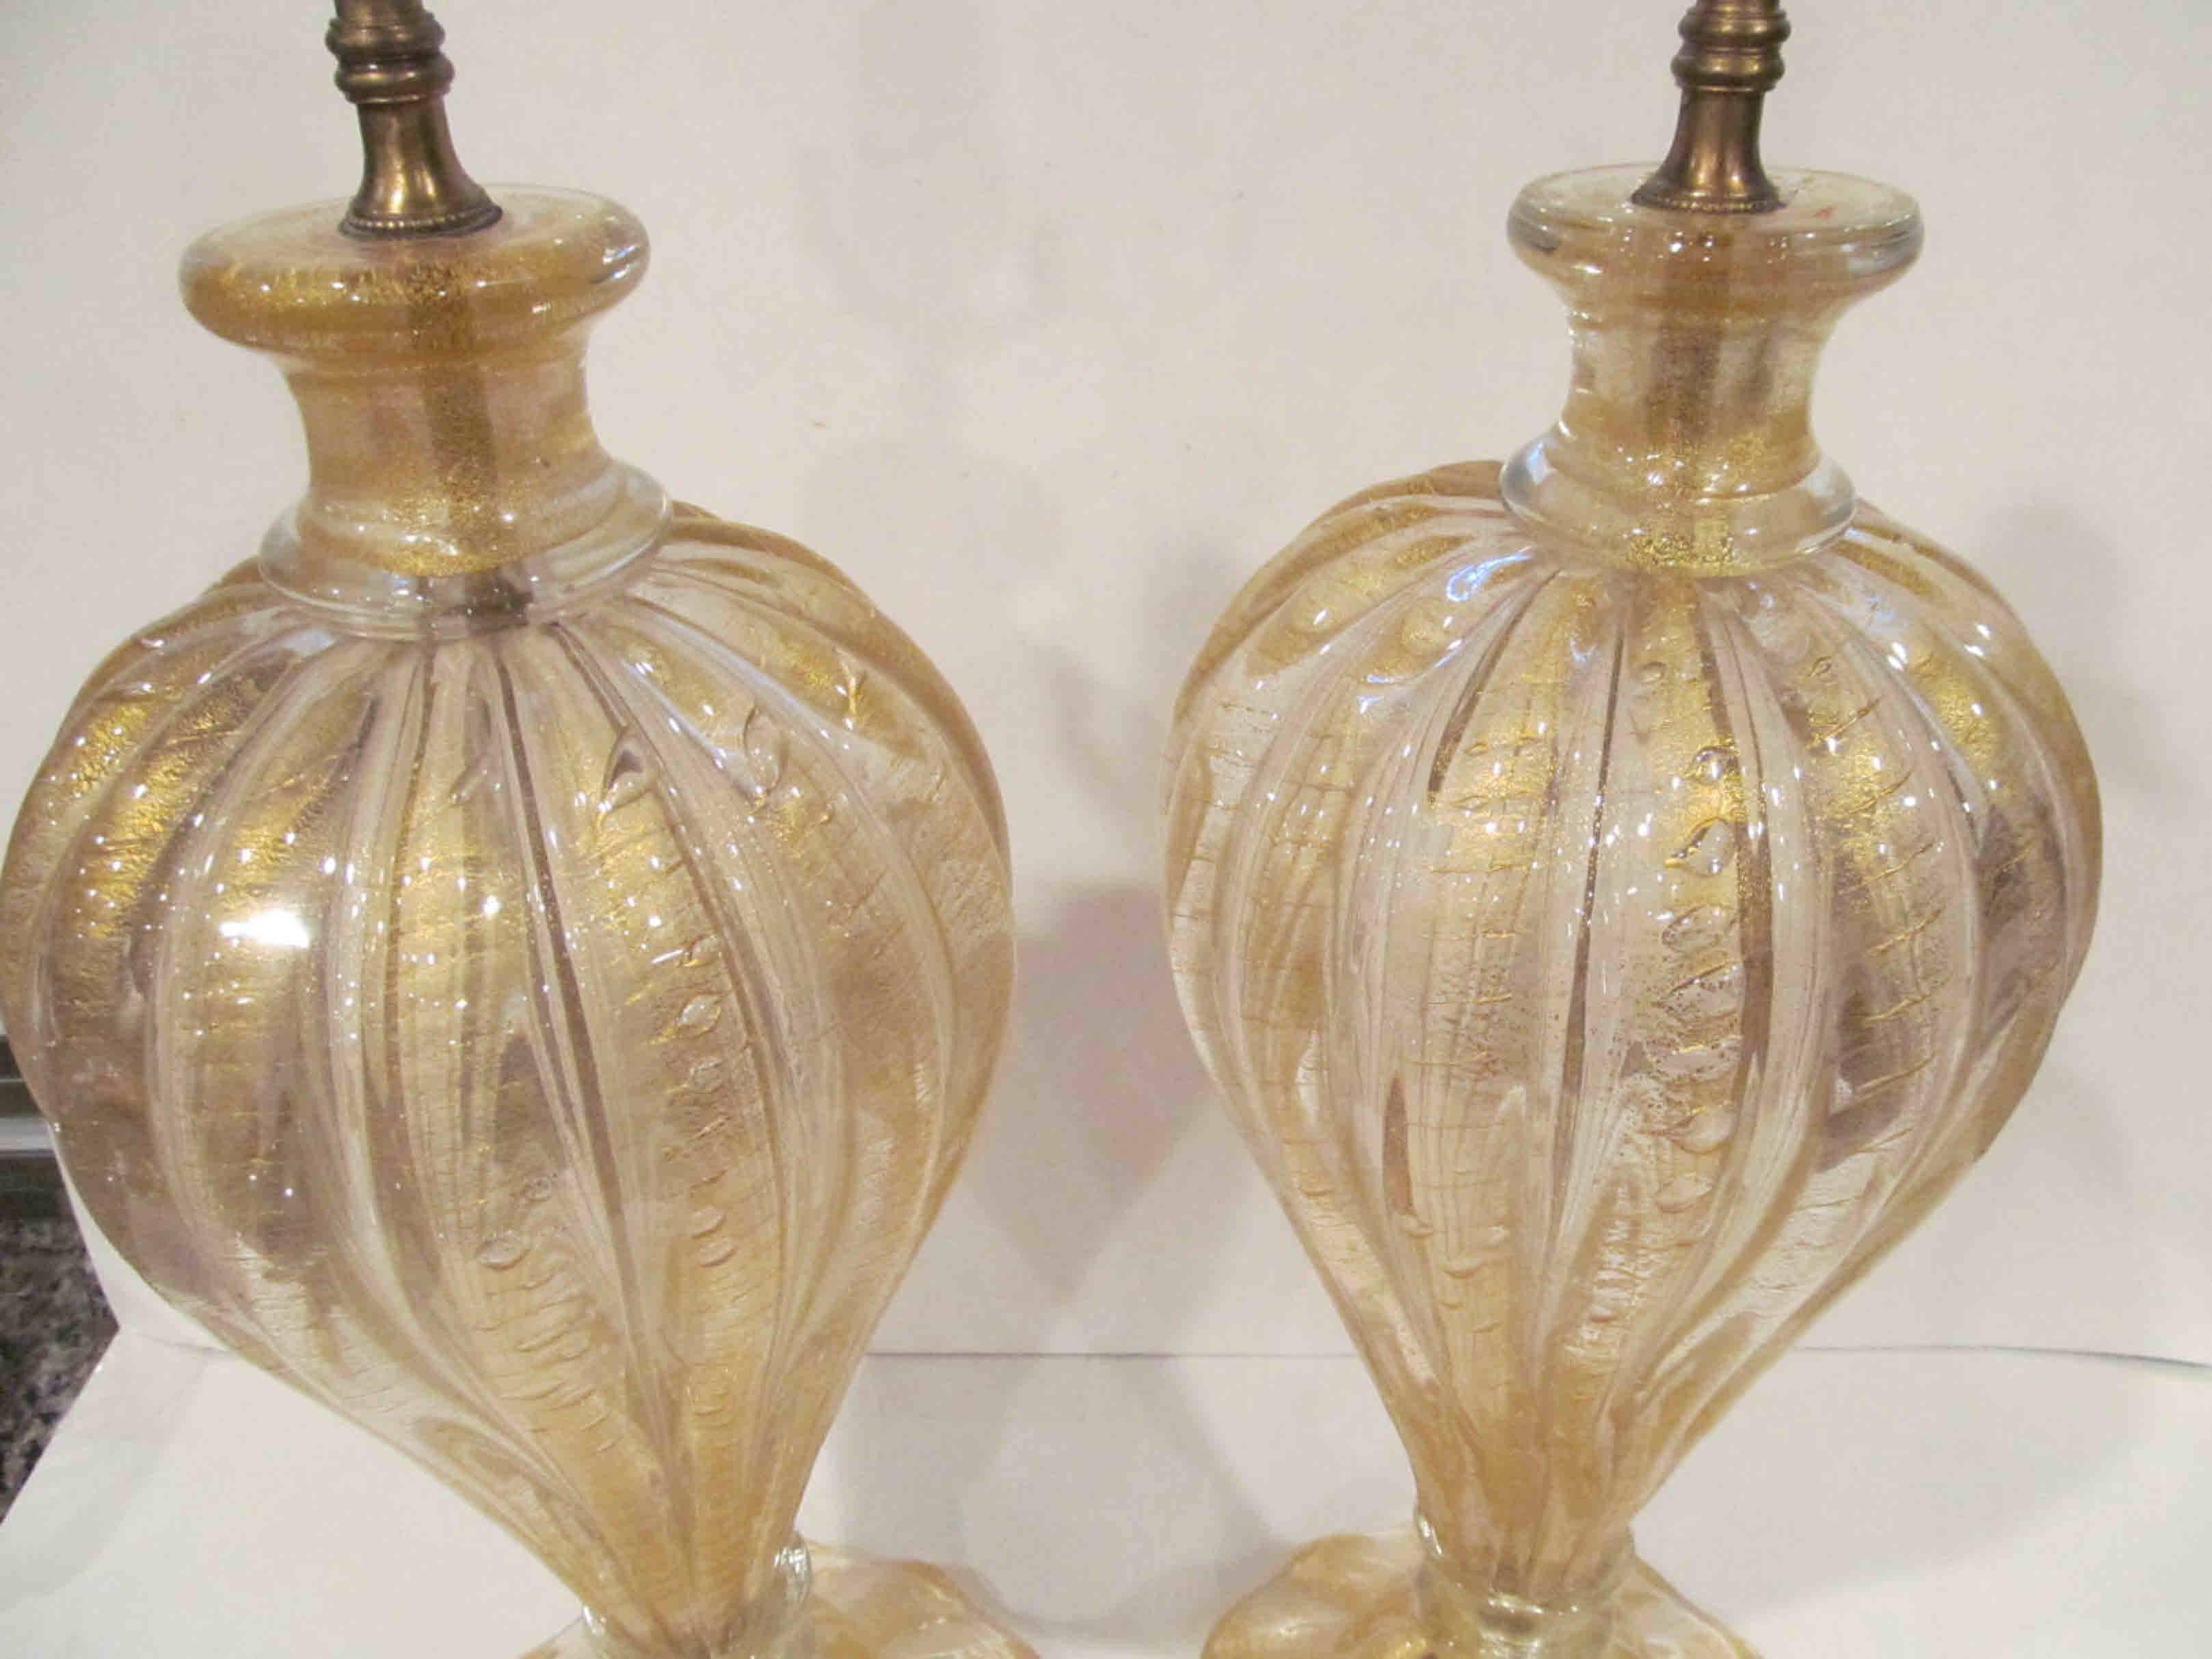 Wonderful and rare sculptural Murano pair of lamps designed by Barovier and Toso. The technique is Cordonato D'Oro. Glass height is 15.75 inches.